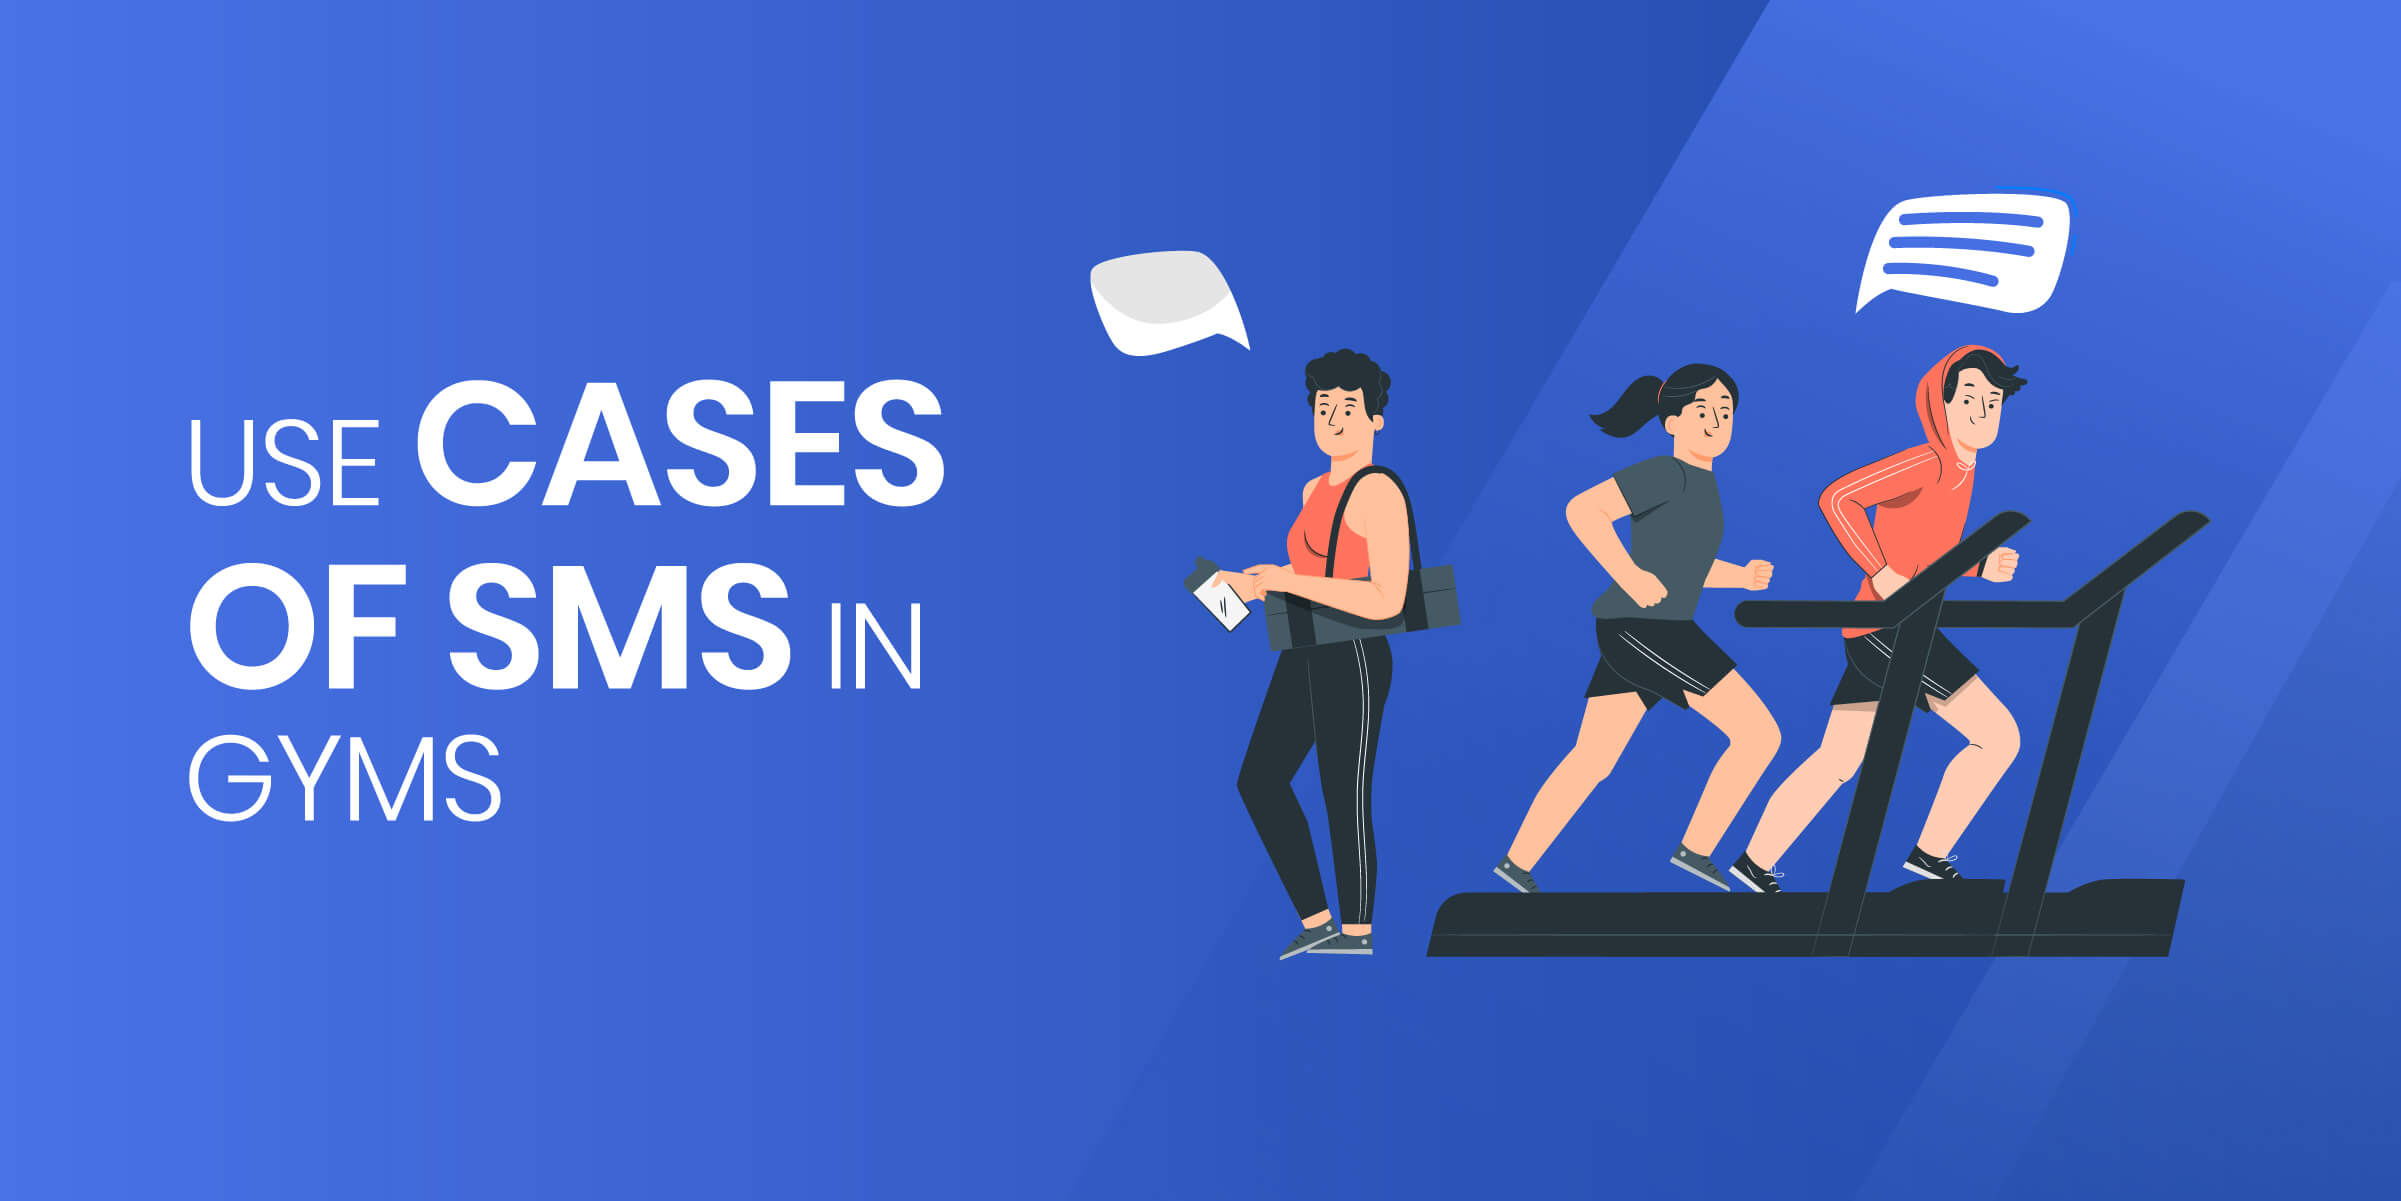 Use Cases of SMS in Gyms